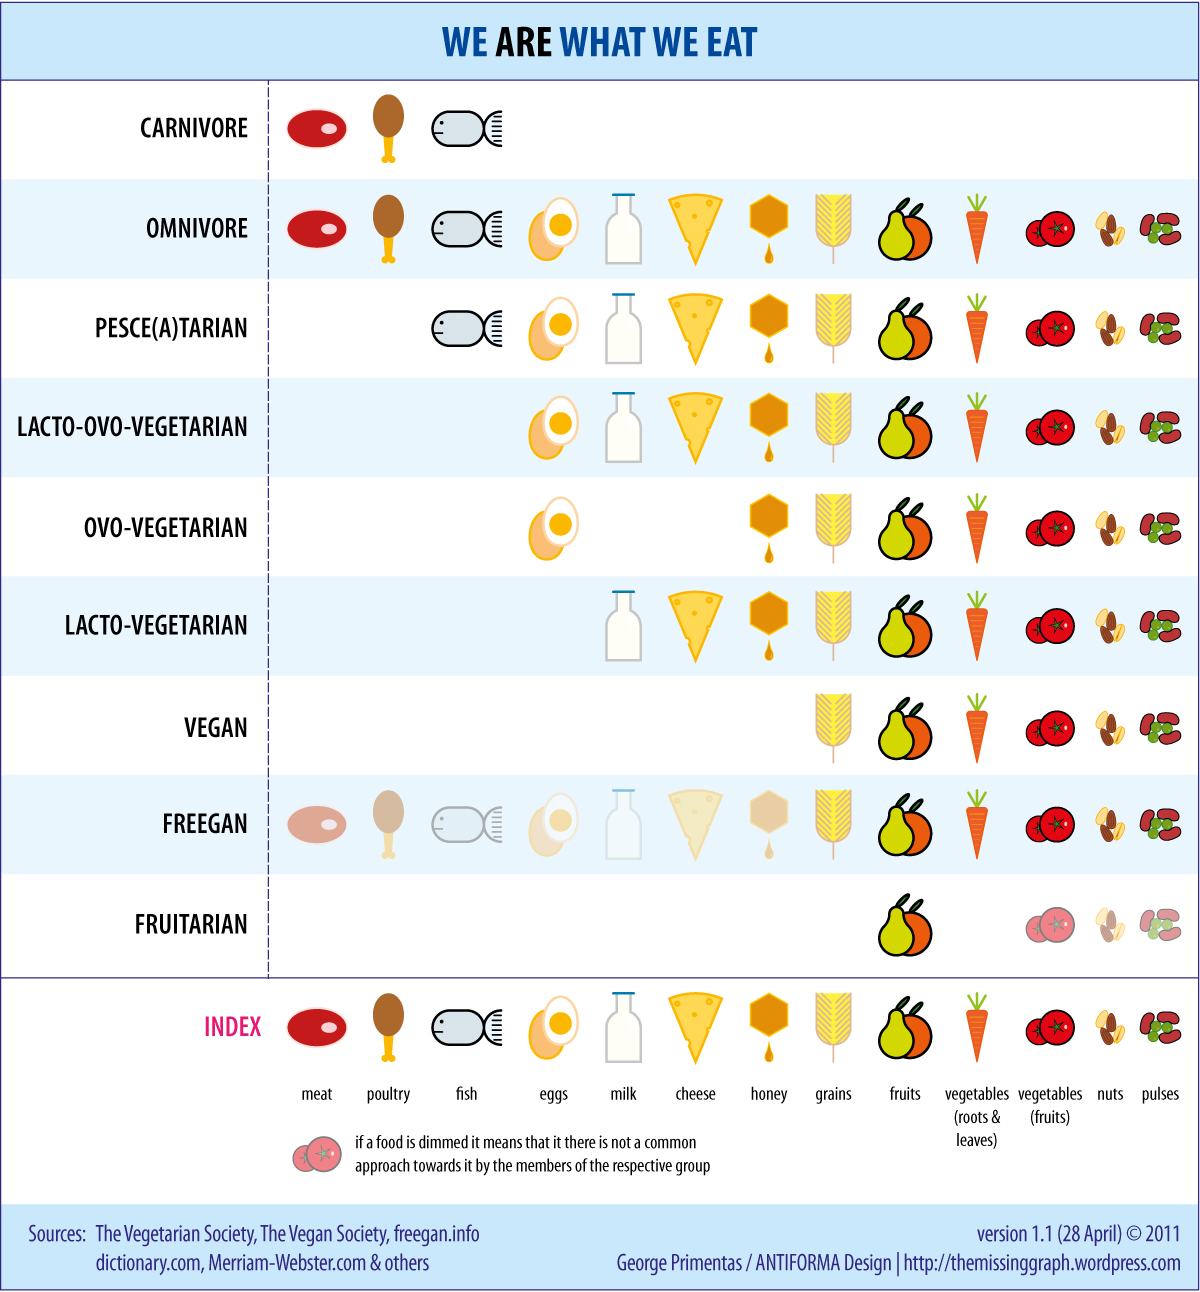 We Are What We Eat: an infographic | The Missing Graph1200 x 1292